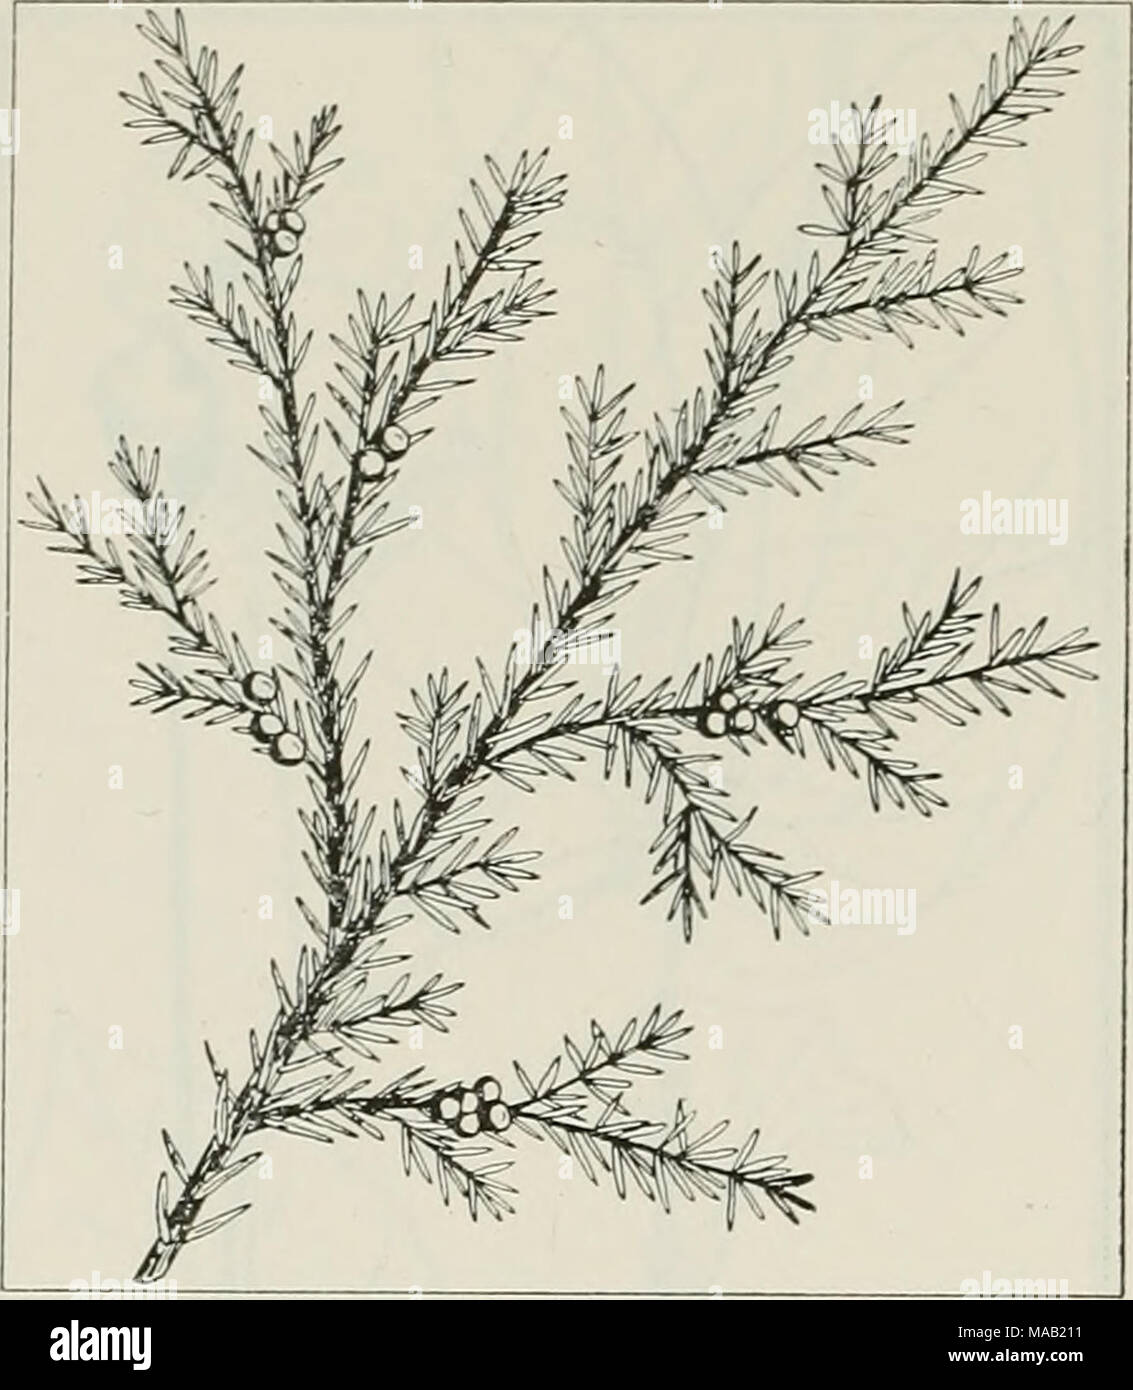 . The drug plants of Illinois . JUNIPERUS COMMUNIS L. Com- mon juniper, hackmatack, horse savin, gorst. Pinaceae. U. S. P. XI, p. 256.— A low and spreading or upright, small shrub or tree, evergreen; bark of the trunk shreddy; foliage in the form of needles, the needles straight, rigid, sharp-pointed, up to ]/i inch long; flowers lacking, cones present instead; fruit blue, glaucous, berry- like, 14 inch in diameter, 3-seeded. The fruit collected in fall and winter, when ripe. In cultivation as an ornamen- tal; established near Lake Michigan in Lake County. Contains the fragrant oil of juniper. Stock Photo